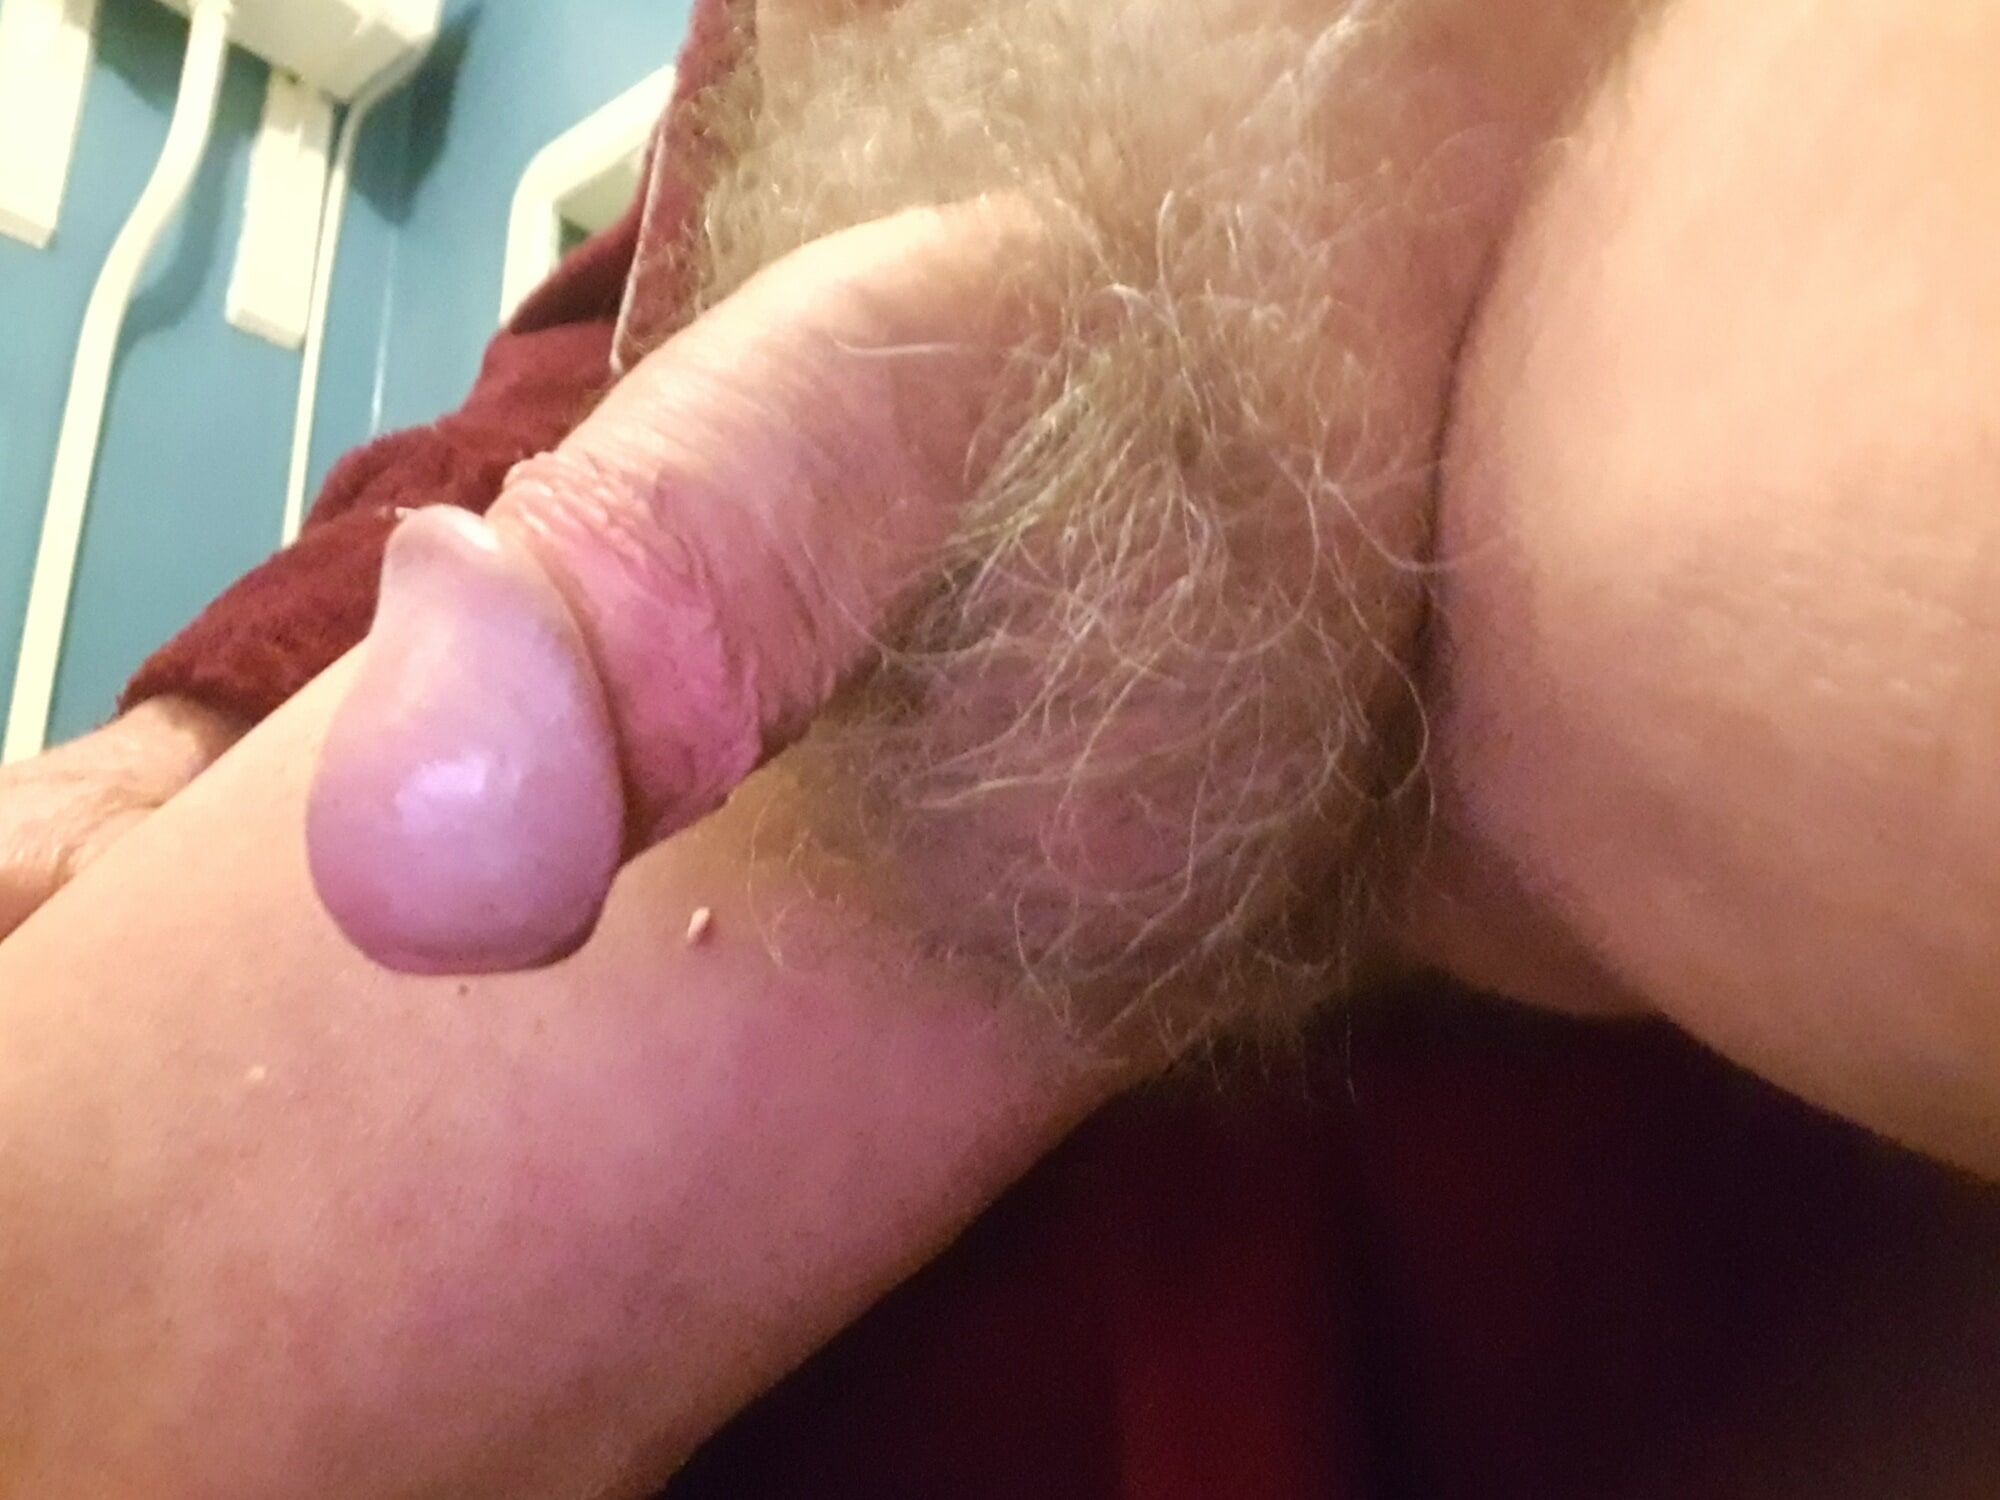 Just cock #5